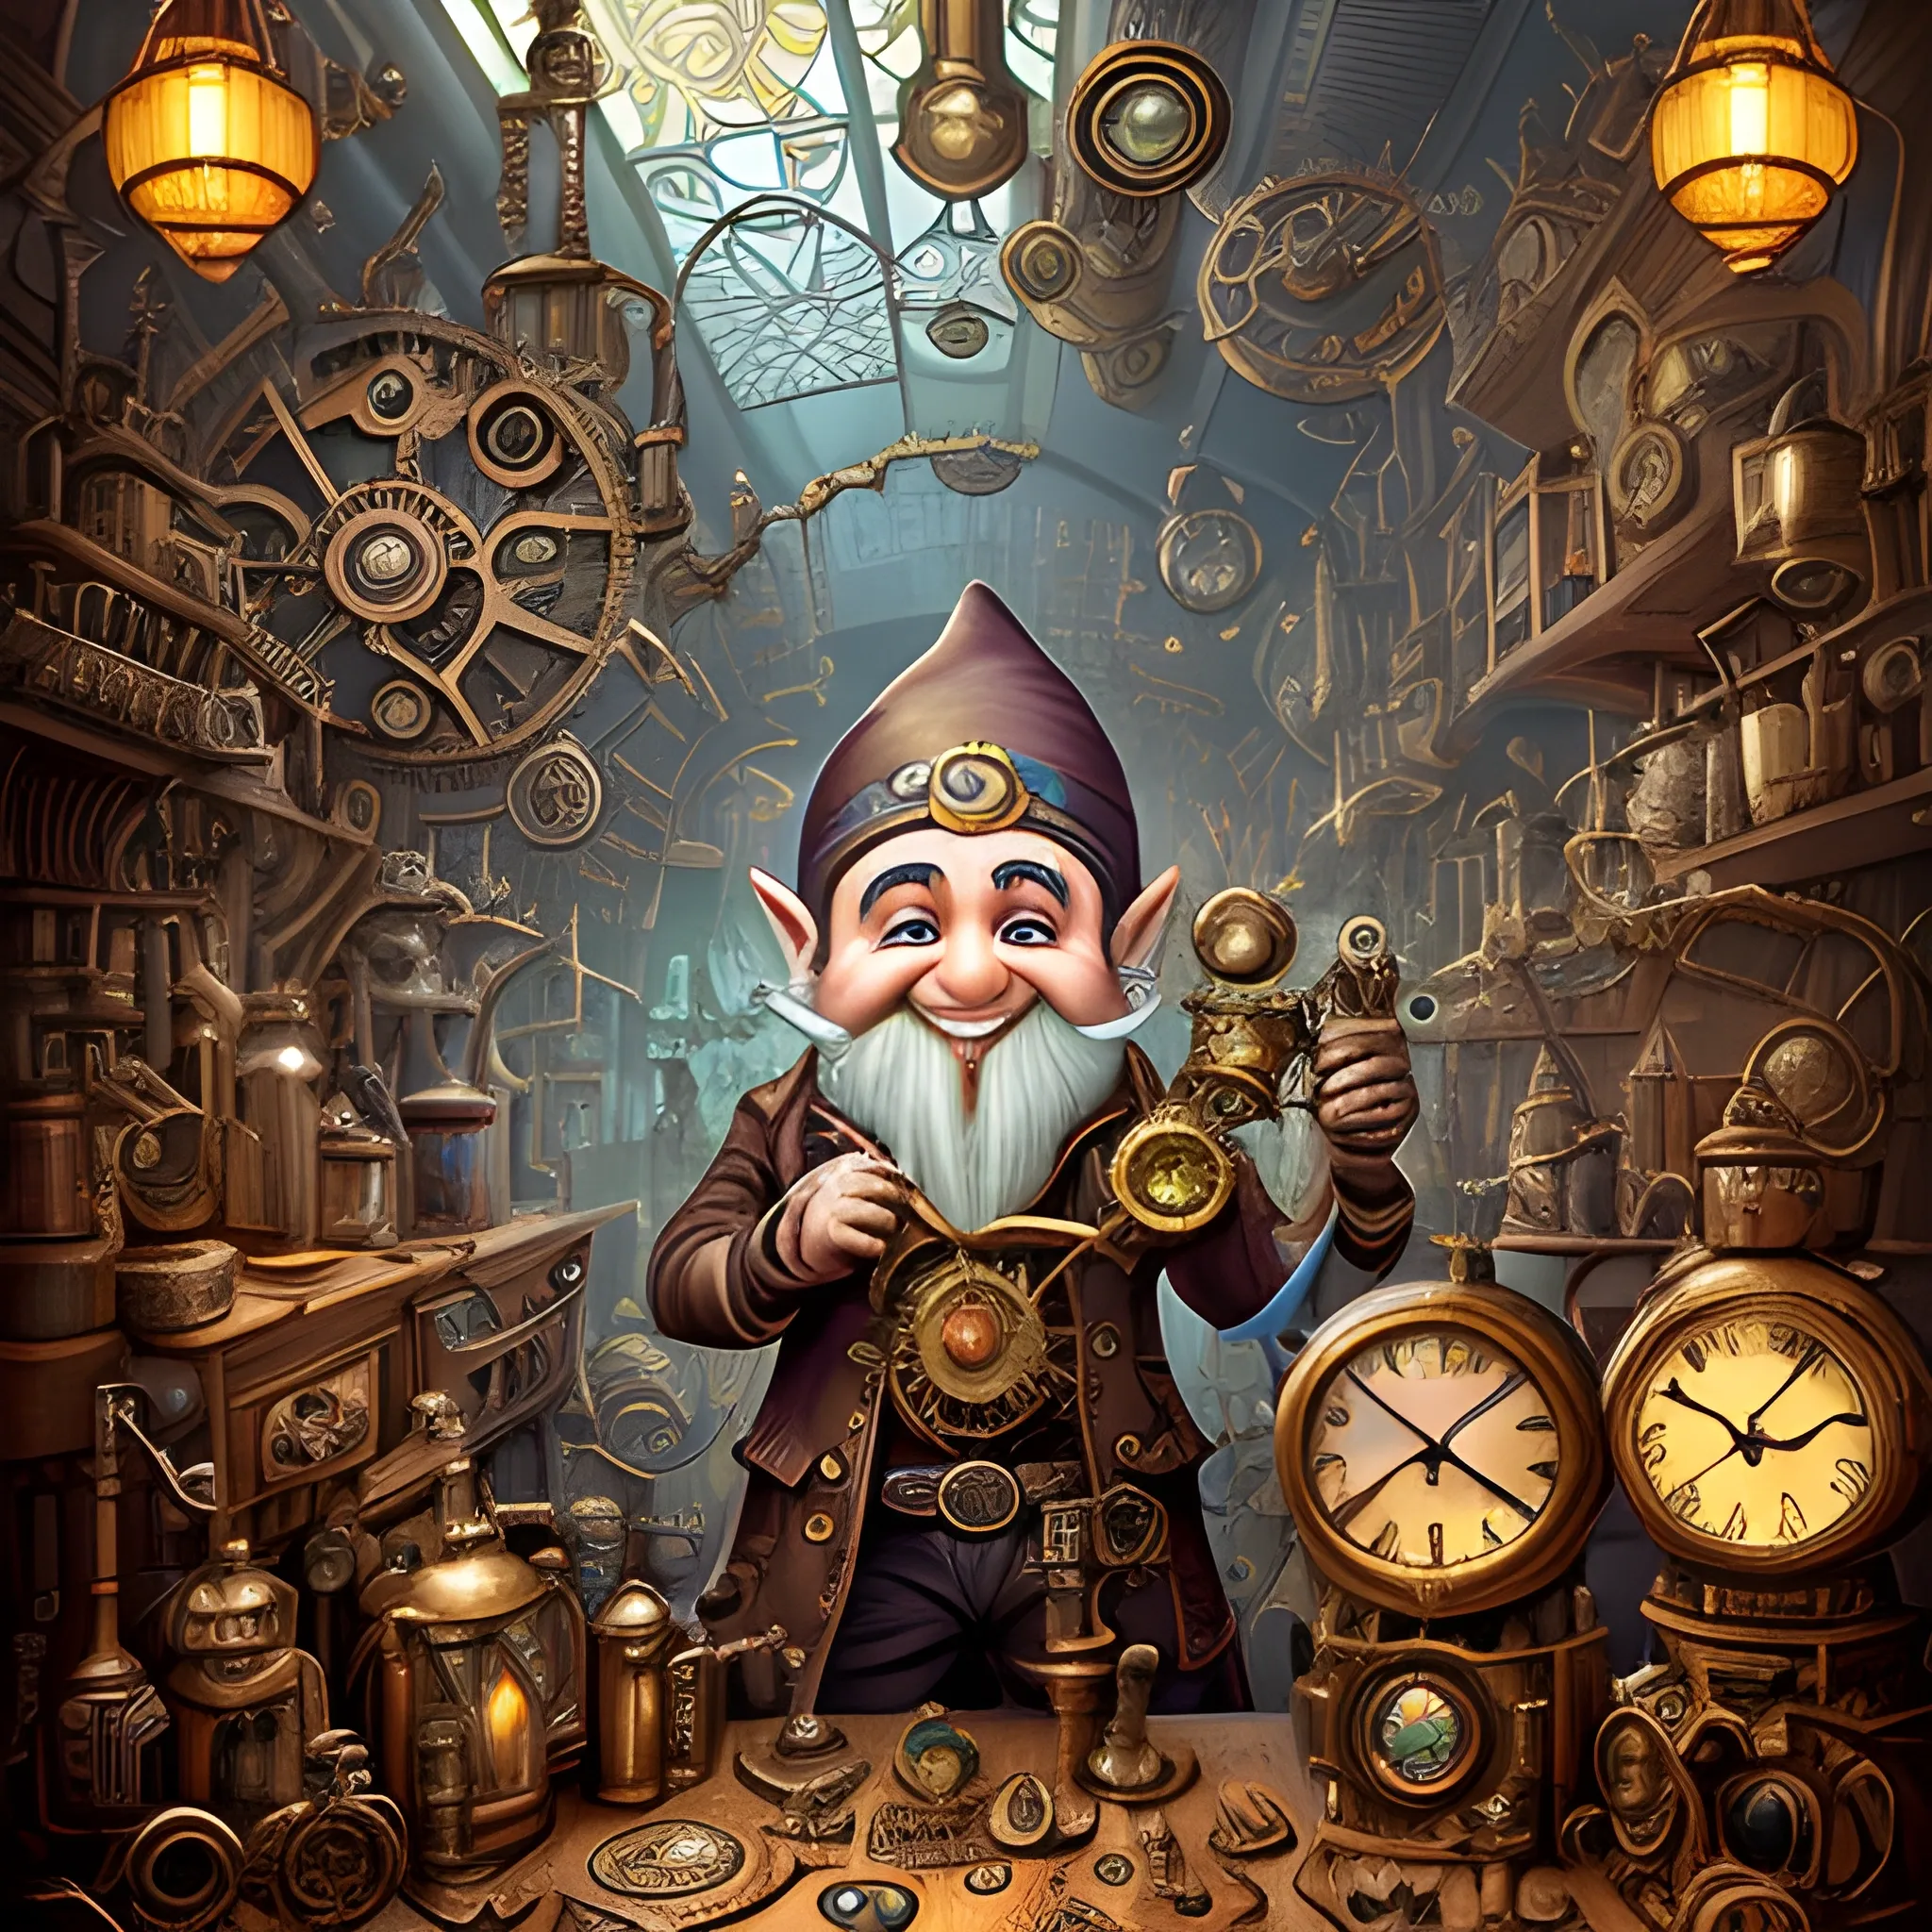 A steampunk-inspired digital illustration of a gnome inventor in a cluttered workshop, surrounded by intricate machinery and gears. The camera angle is a medium shot, capturing the gnome's enthusiastic expression as he tinkers with a fantastical contraption. The lighting is warm and atmospheric, with rays of sunlight streaming through stained glass windows, casting vibrant colors and ((shadows)) across the room. The style combines elements of steampunk and clock-punk, resembling the works of Jules Verne and H.R. Giger. The image is detailed and intricate, showcasing the gnome's ingenious inventions and the mesmerizing complexity of the steampunk world. It is a visually stunning artwork that captures the imagination.